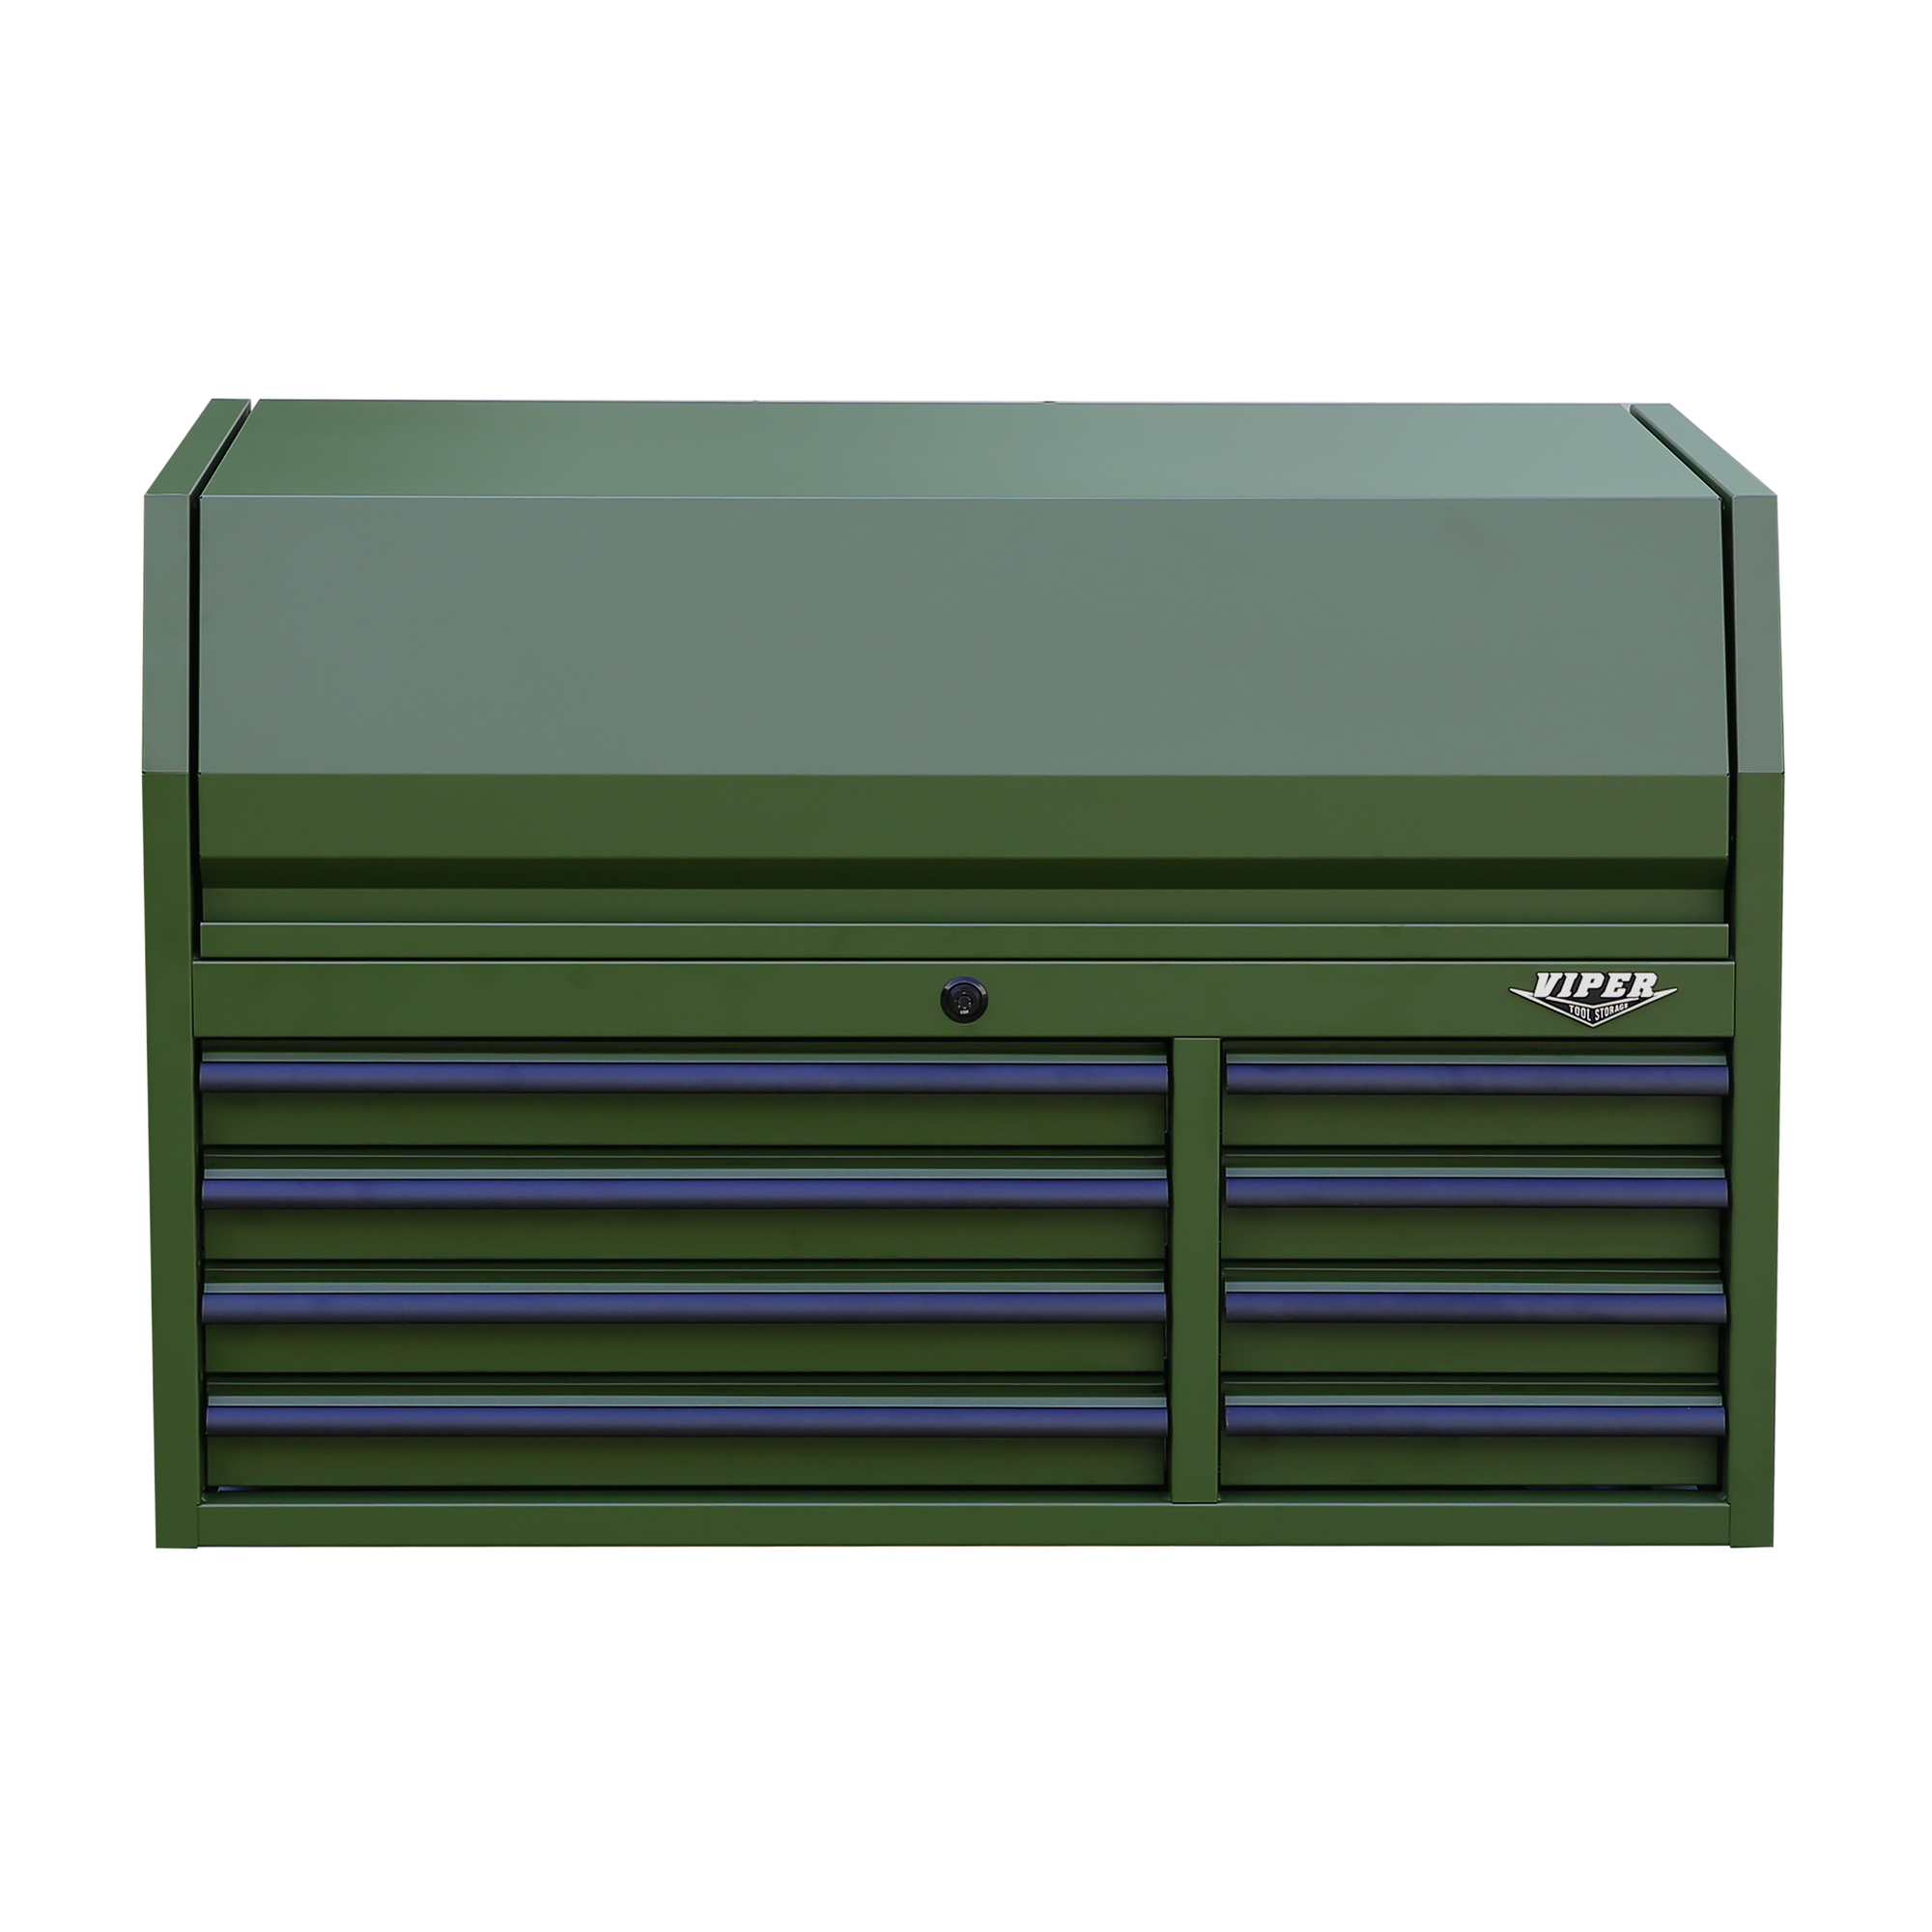 Viper Tool Storage, 8-Drawer Top Chest, Army Green, Width 40.9 in, Height 26.6 in, Color Green, Model V4108ARGC